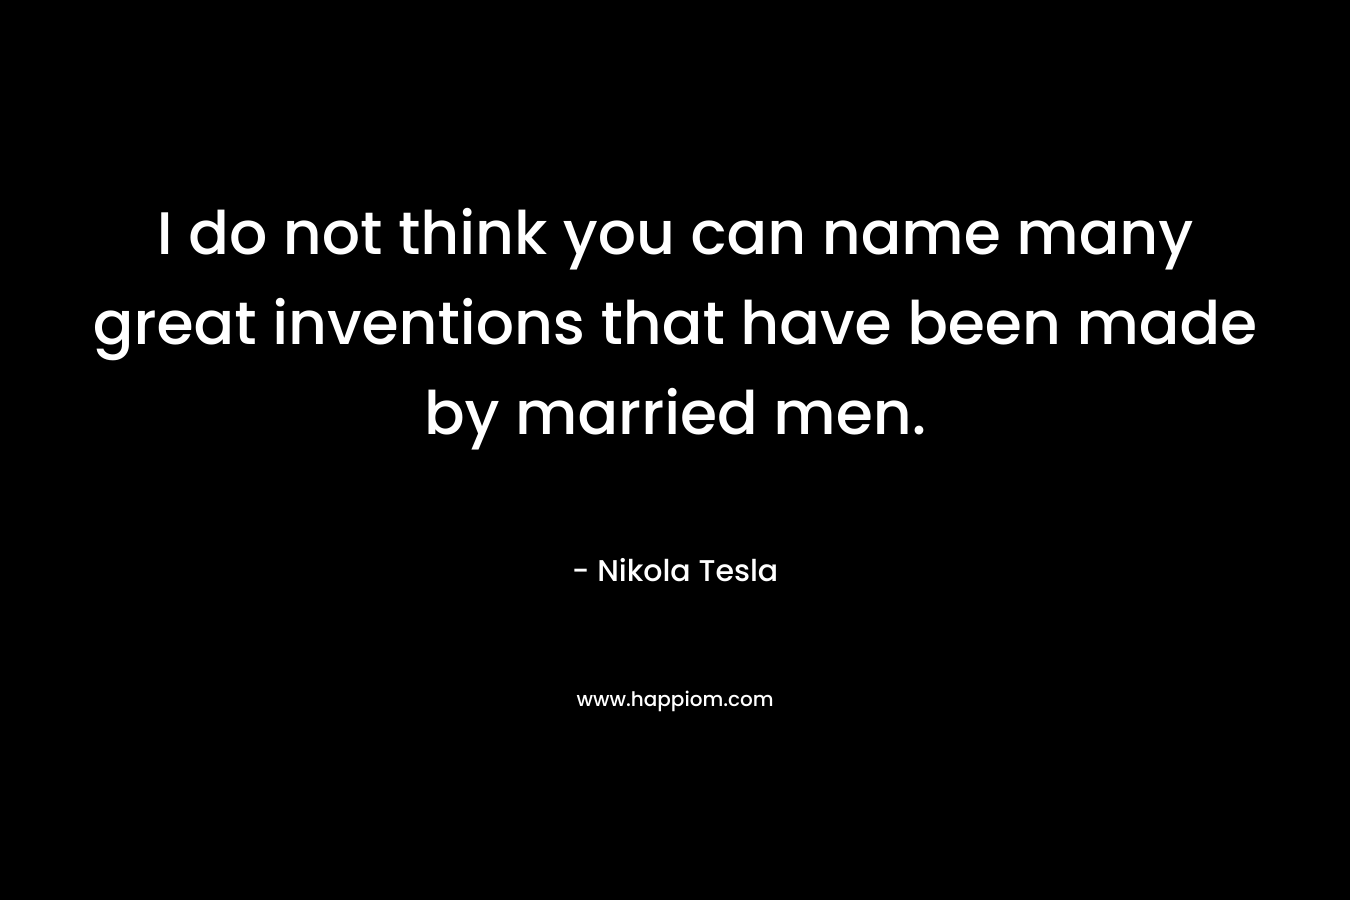 I do not think you can name many great inventions that have been made by married men. – Nikola Tesla